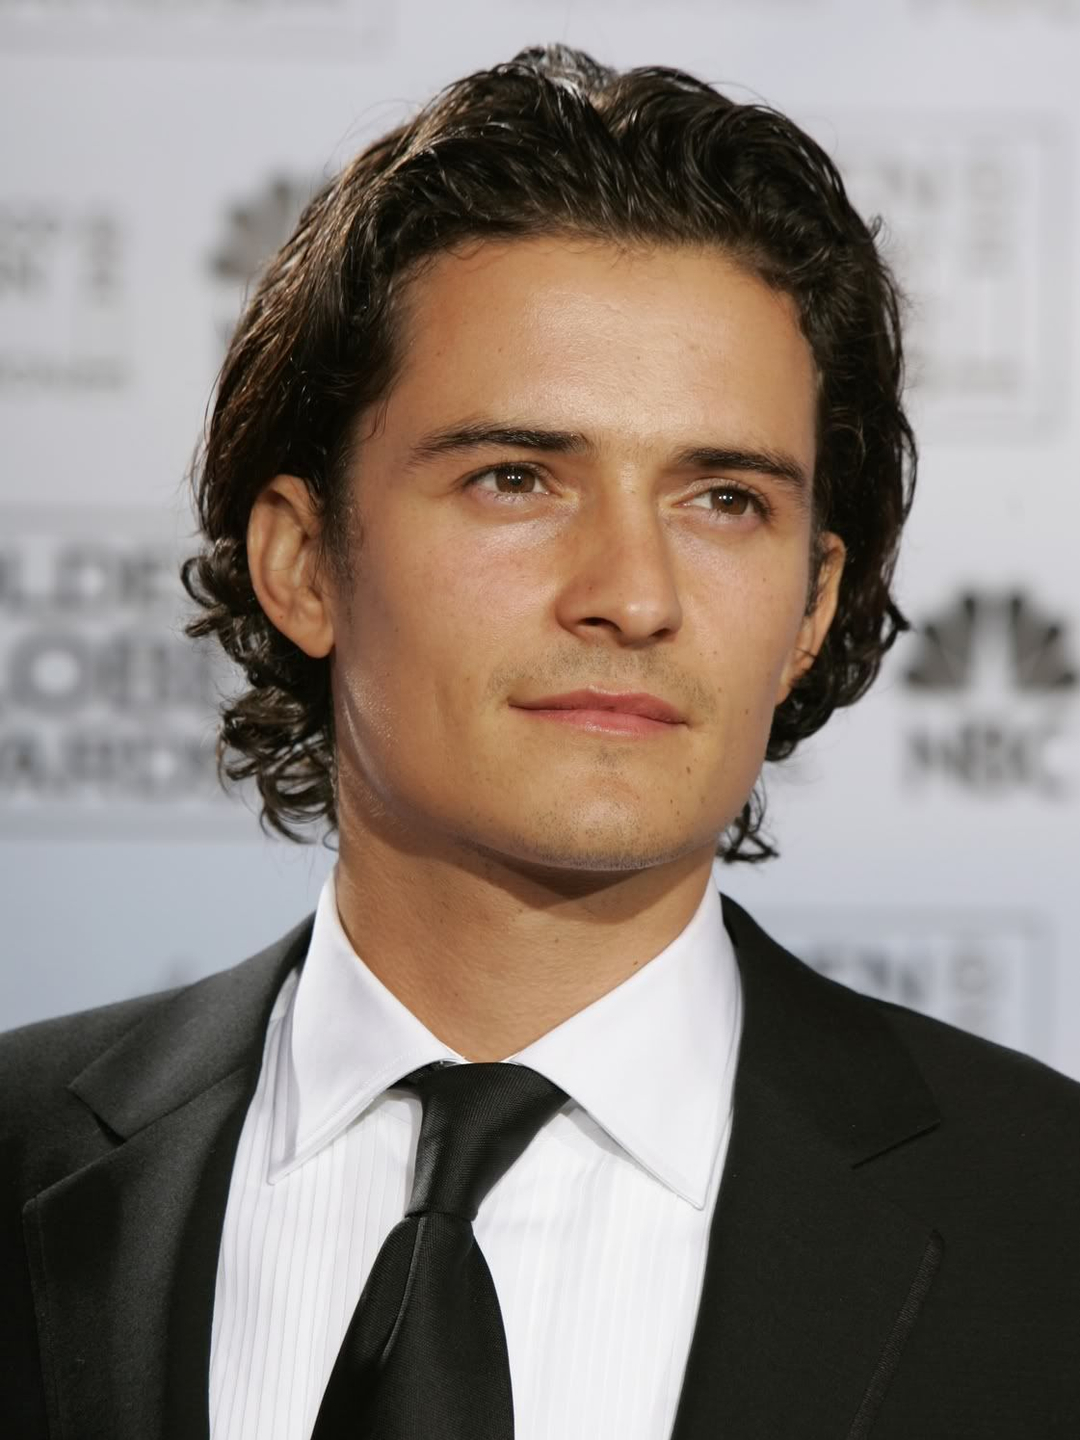 Orlando Bloom where does he live